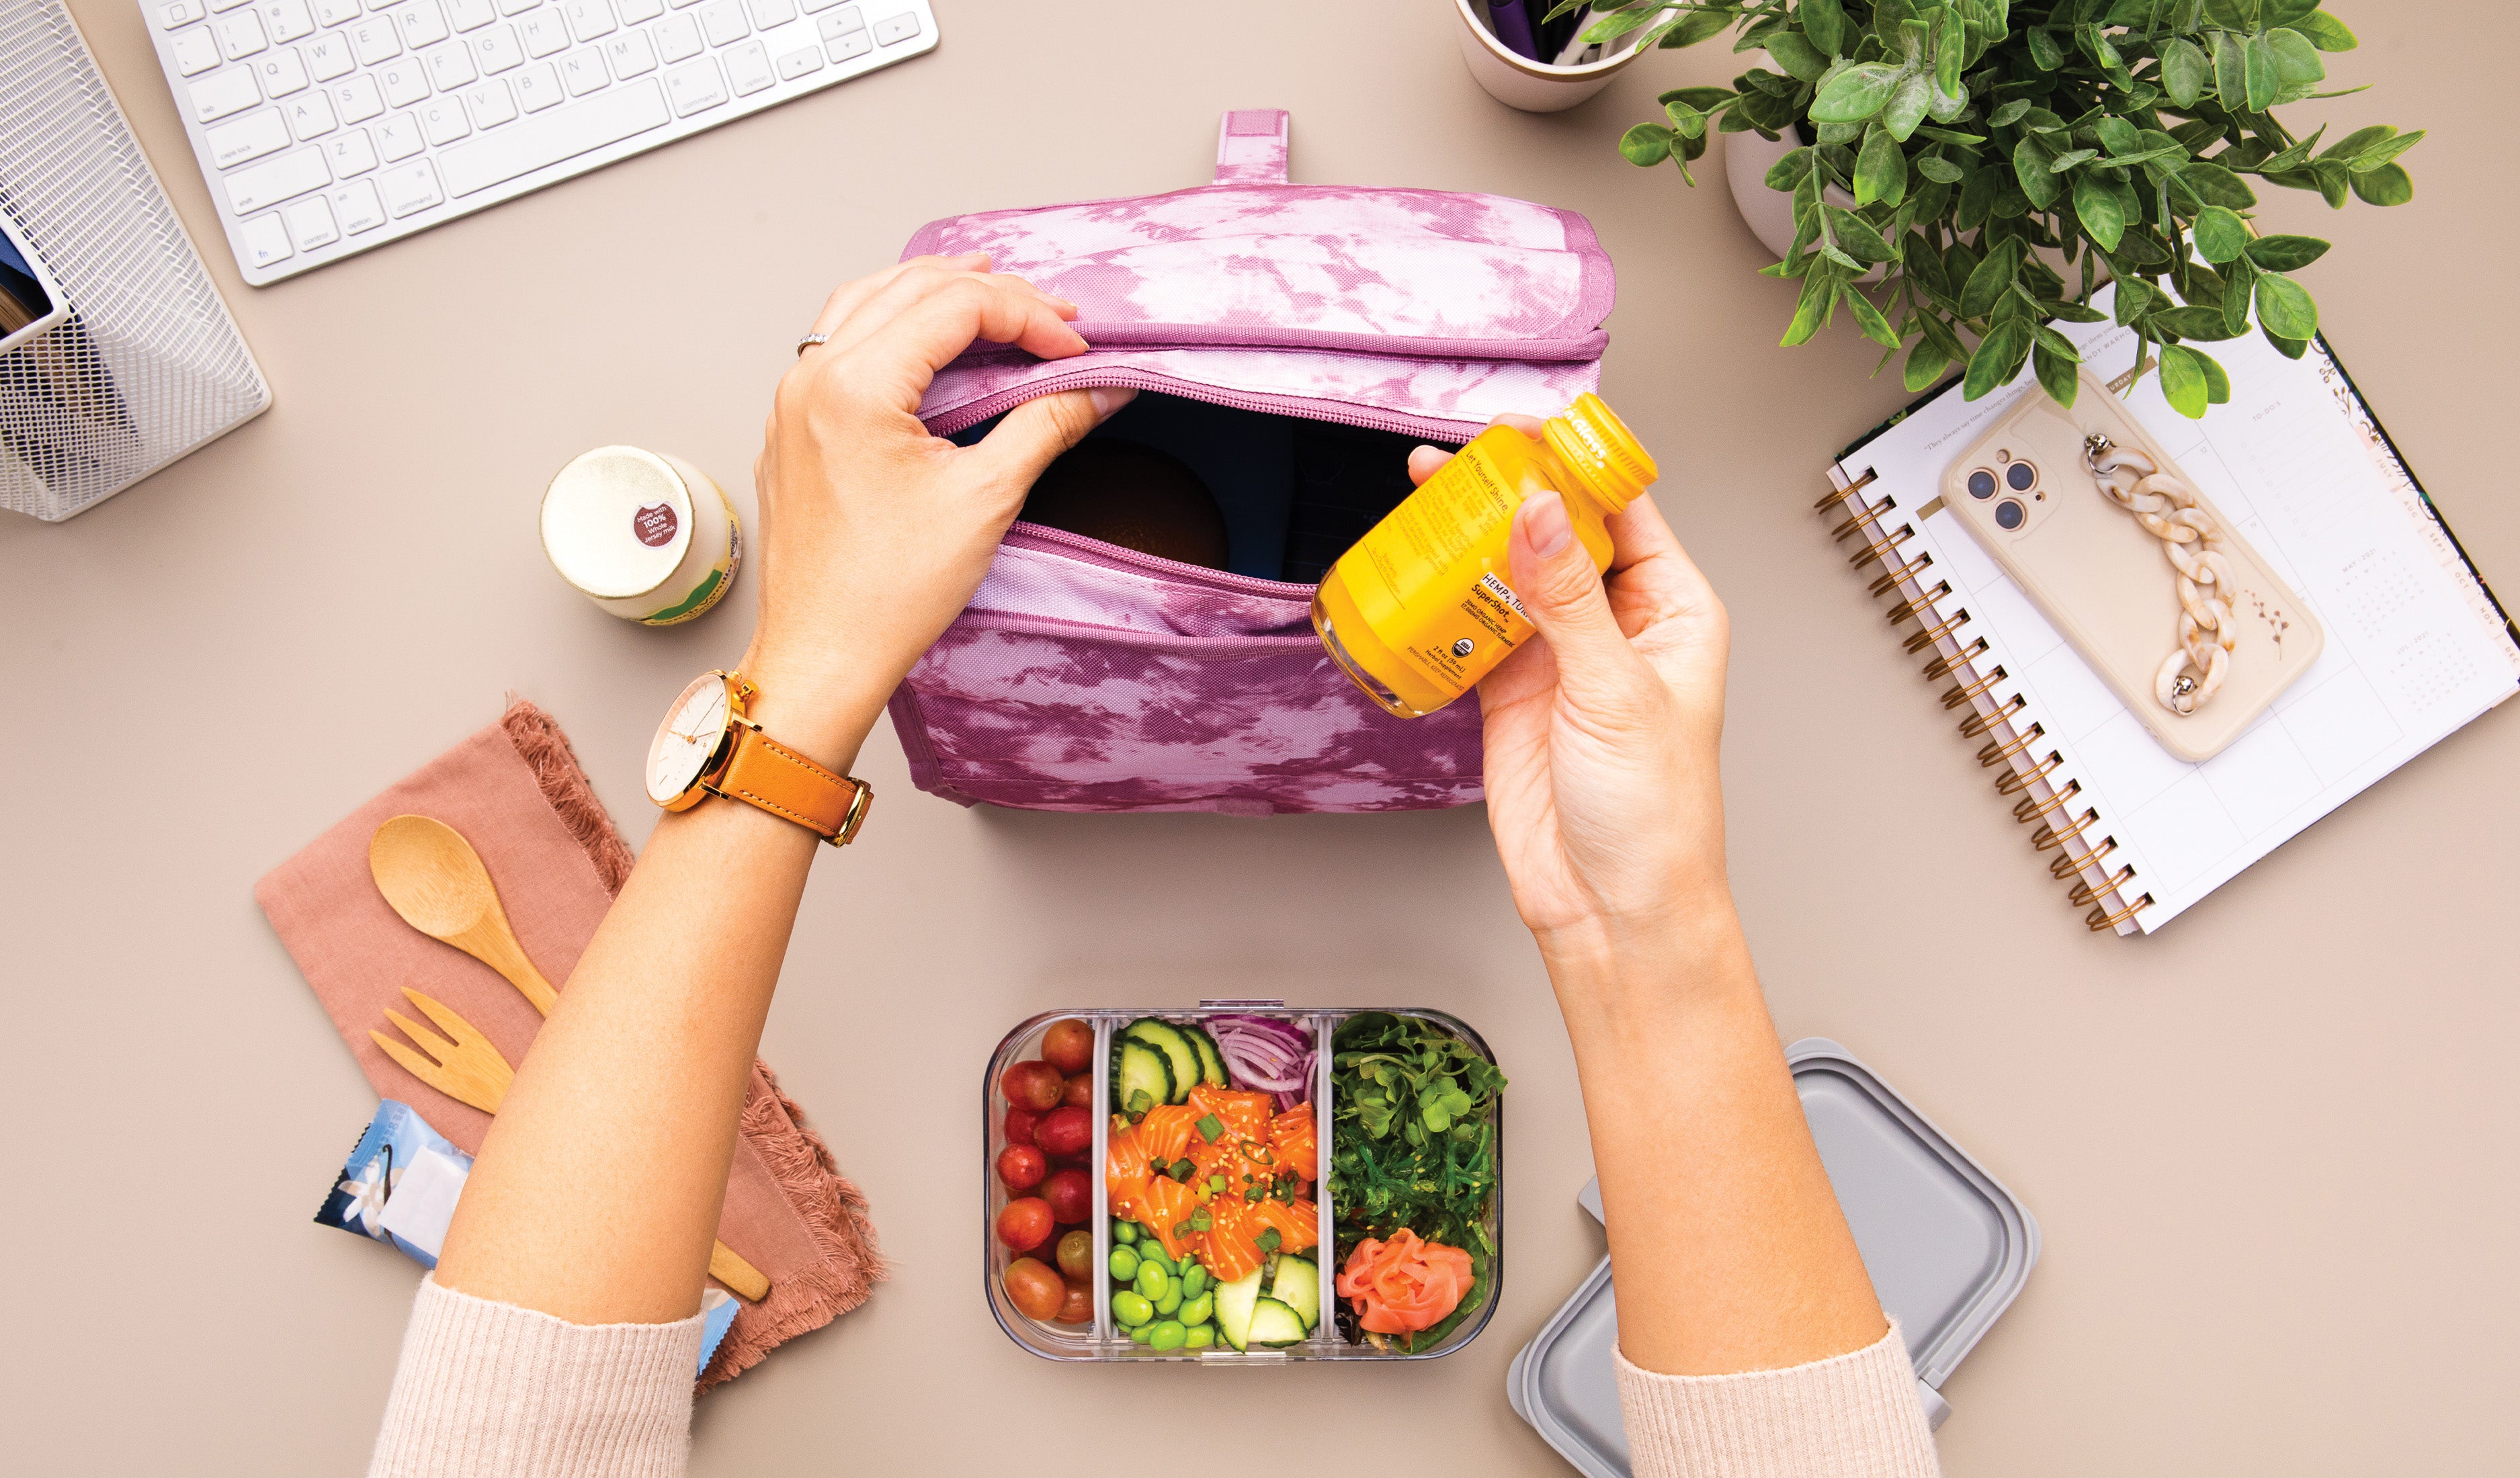 Best Deal in Canada | Thermos Barbie Doggie Lunch Bag - Canada's best deals  on Electronics, TVs, Unlocked Cell Phones, Macbooks, Laptops, Kitchen  Appliances, Toys, Bed and Bathroom products, Heaters, Humidifiers, Hair